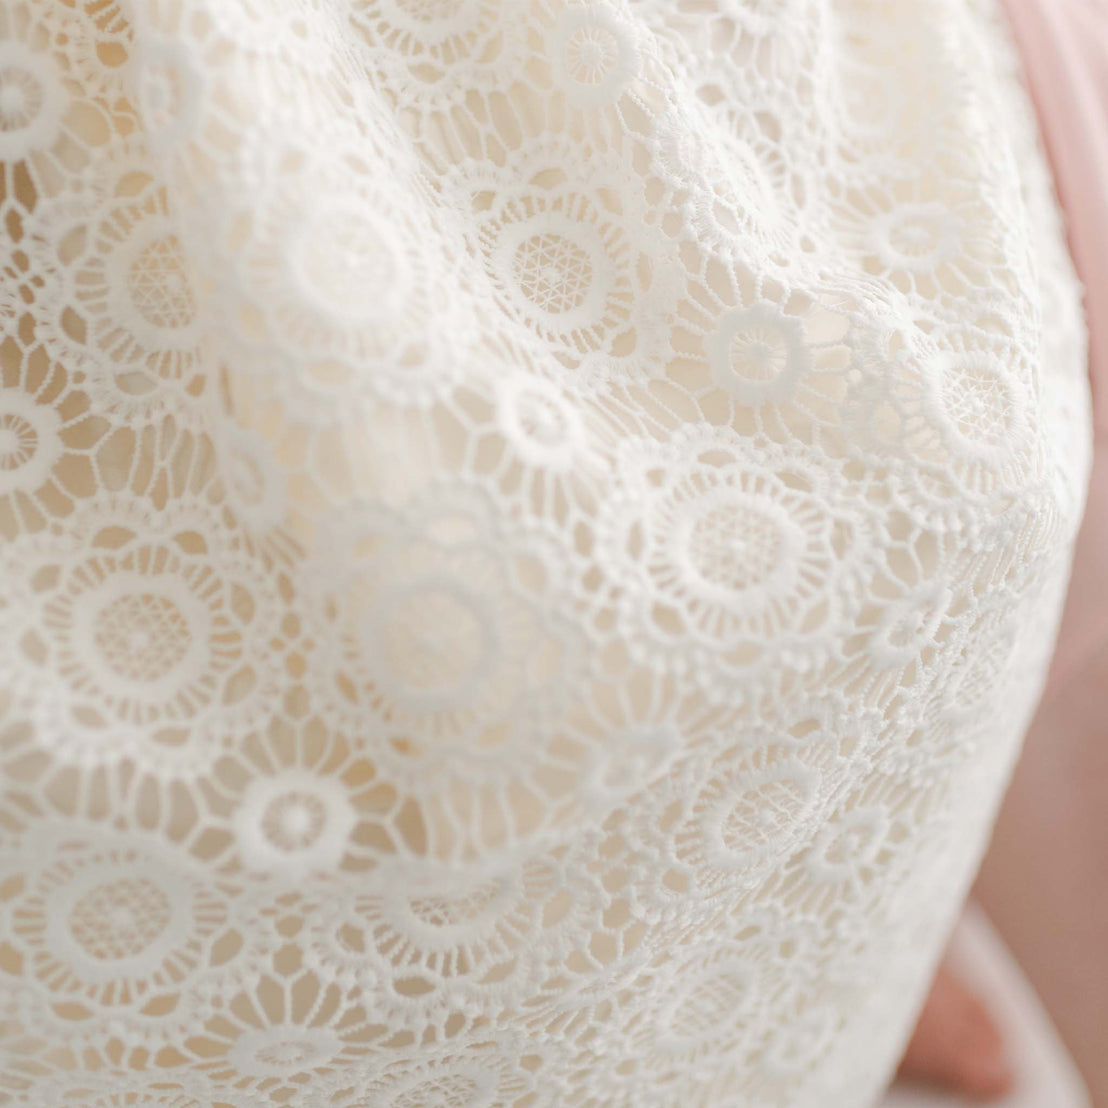 Close-up image of a Poppy Christening Gown & Bonnet with intricate floral and circular patterns, reminiscent of a Christening gown. The delicate material appears draped over a surface, showcasing the detailed and decorative design elements. Light and shadows create subtle variations in the texture.